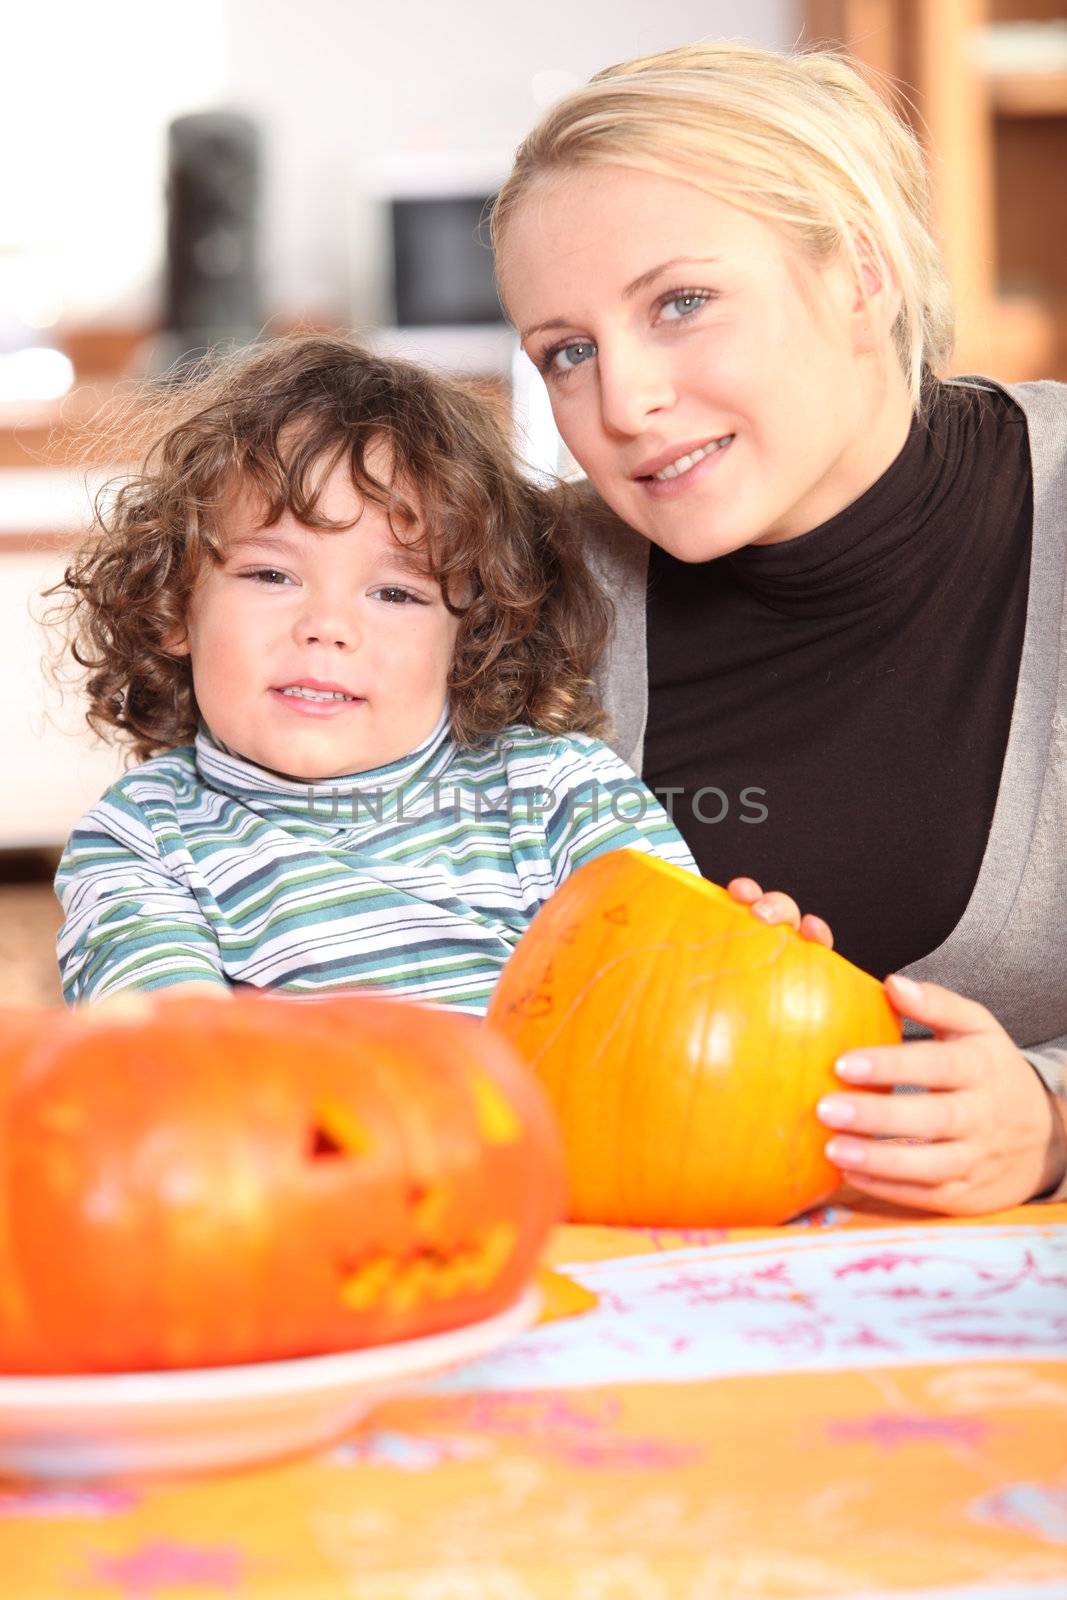 Woman carving pumpkins with her child by phovoir